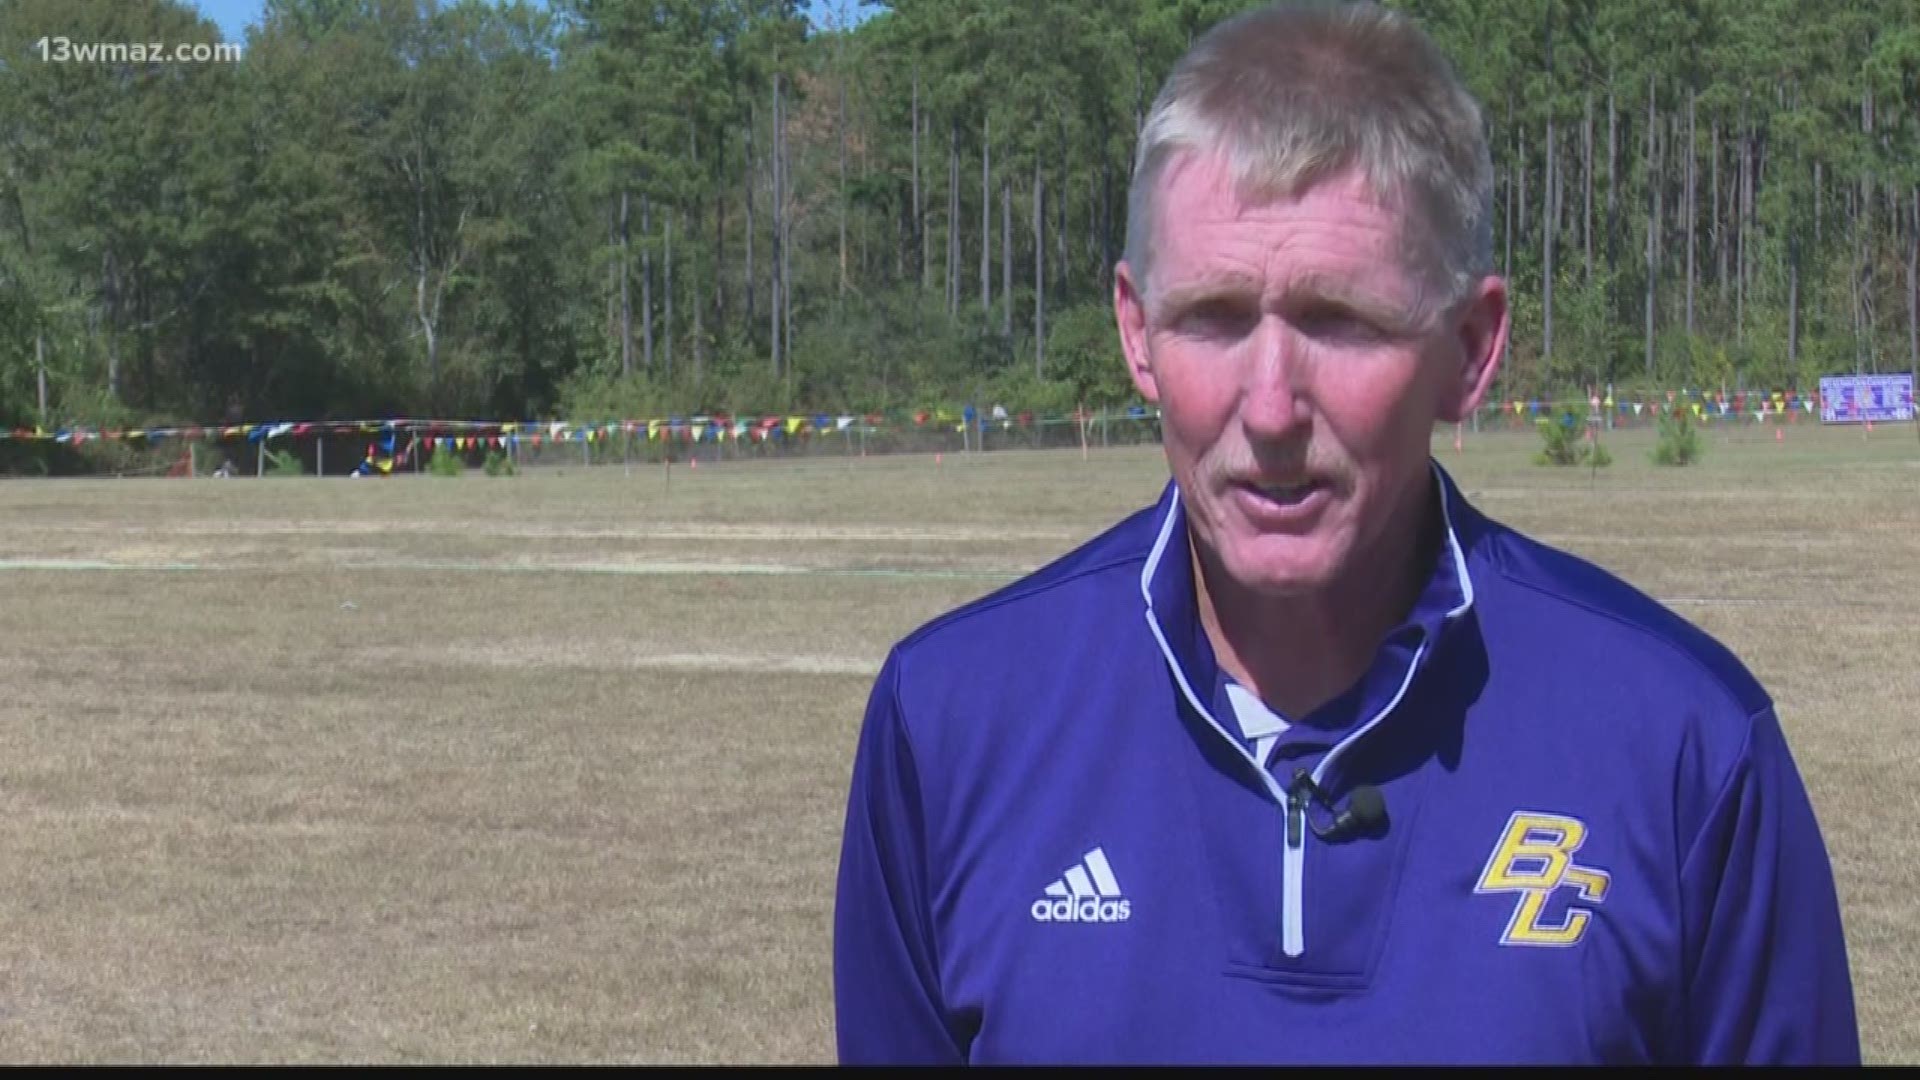 He's a legend in the cross country circuit and a lifelong Royal, both as a student and a coach. Meet Shelly Cranford, a true Bleckley County hero.